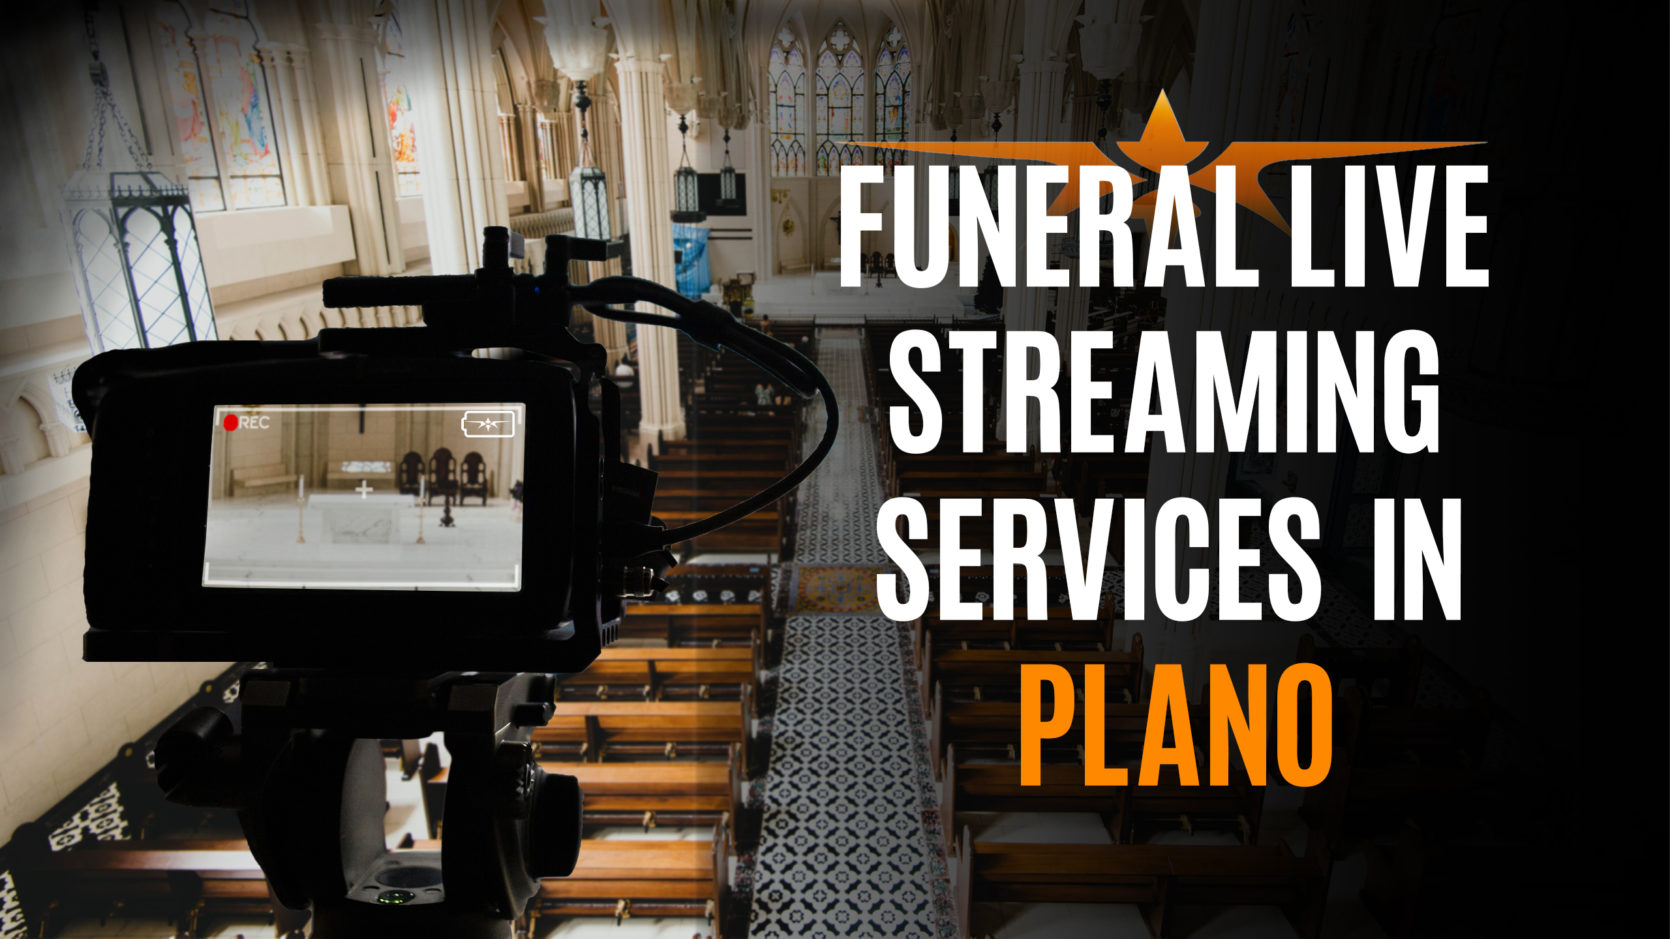 Funeral Live Streaming Services in Plano